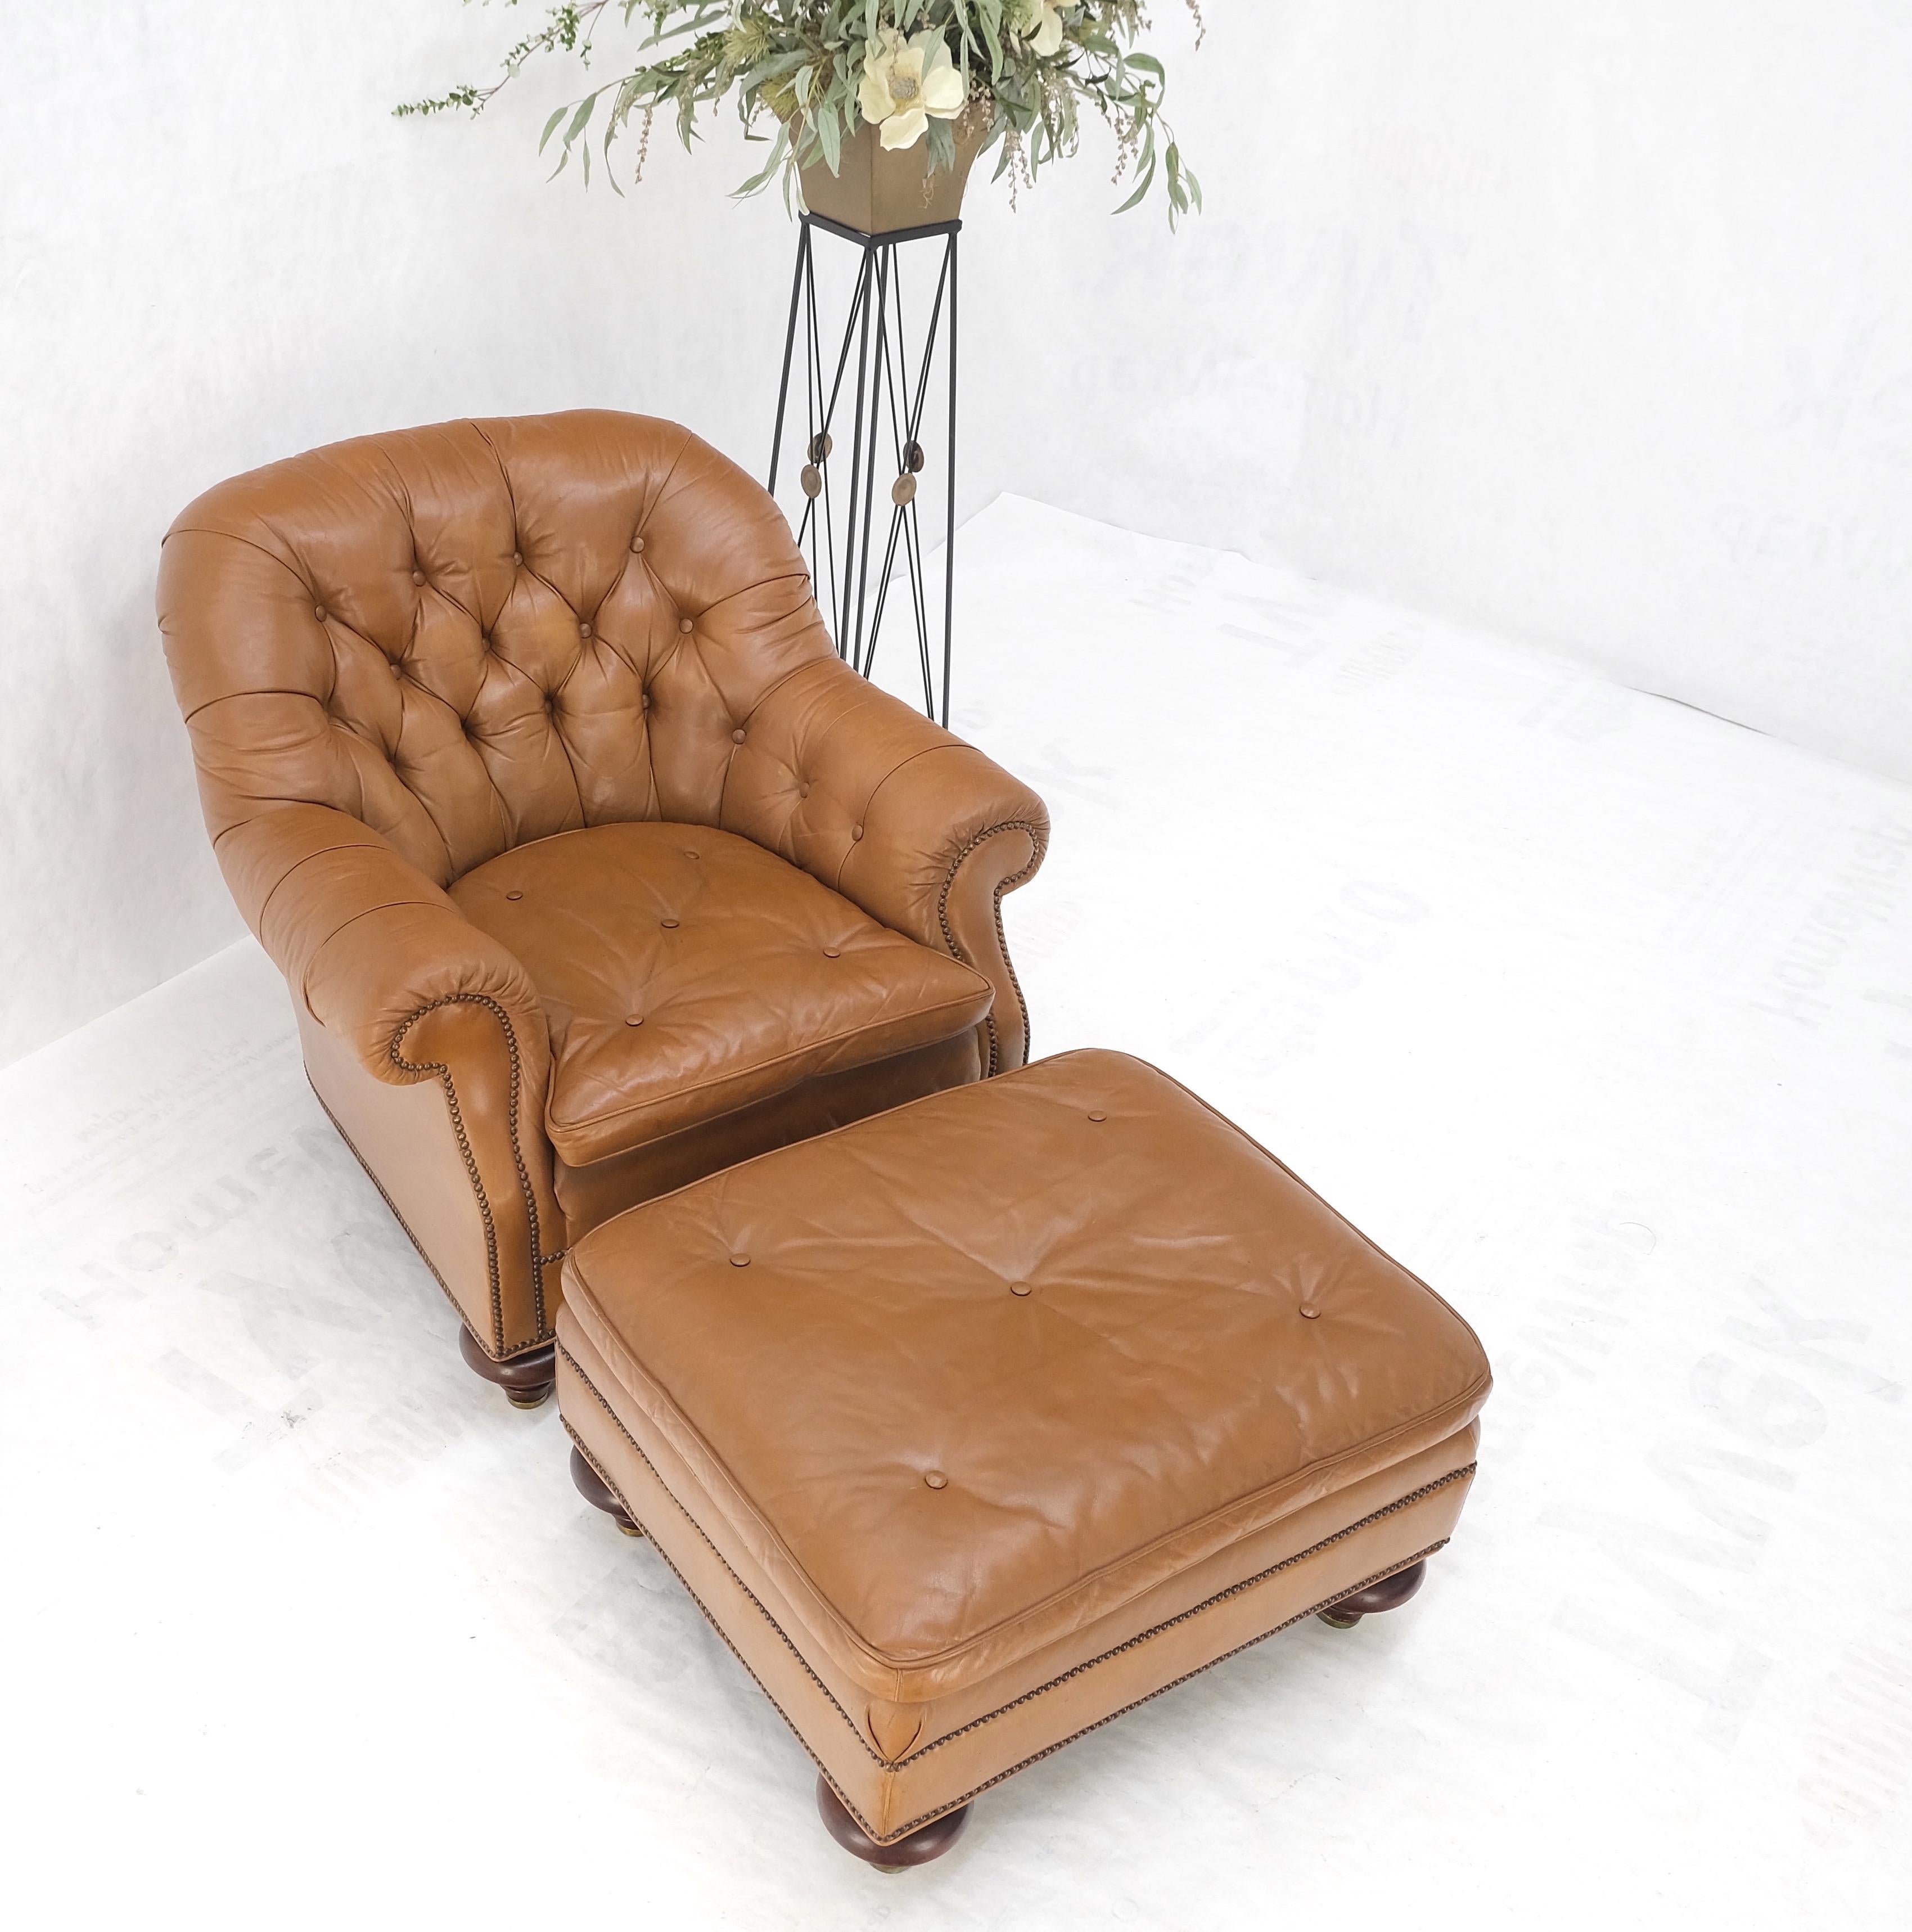 20th Century Baker Tan Leather Tufted Back Large Arm Chair w/ Ottoman Pouf Turned Legs MINT! For Sale